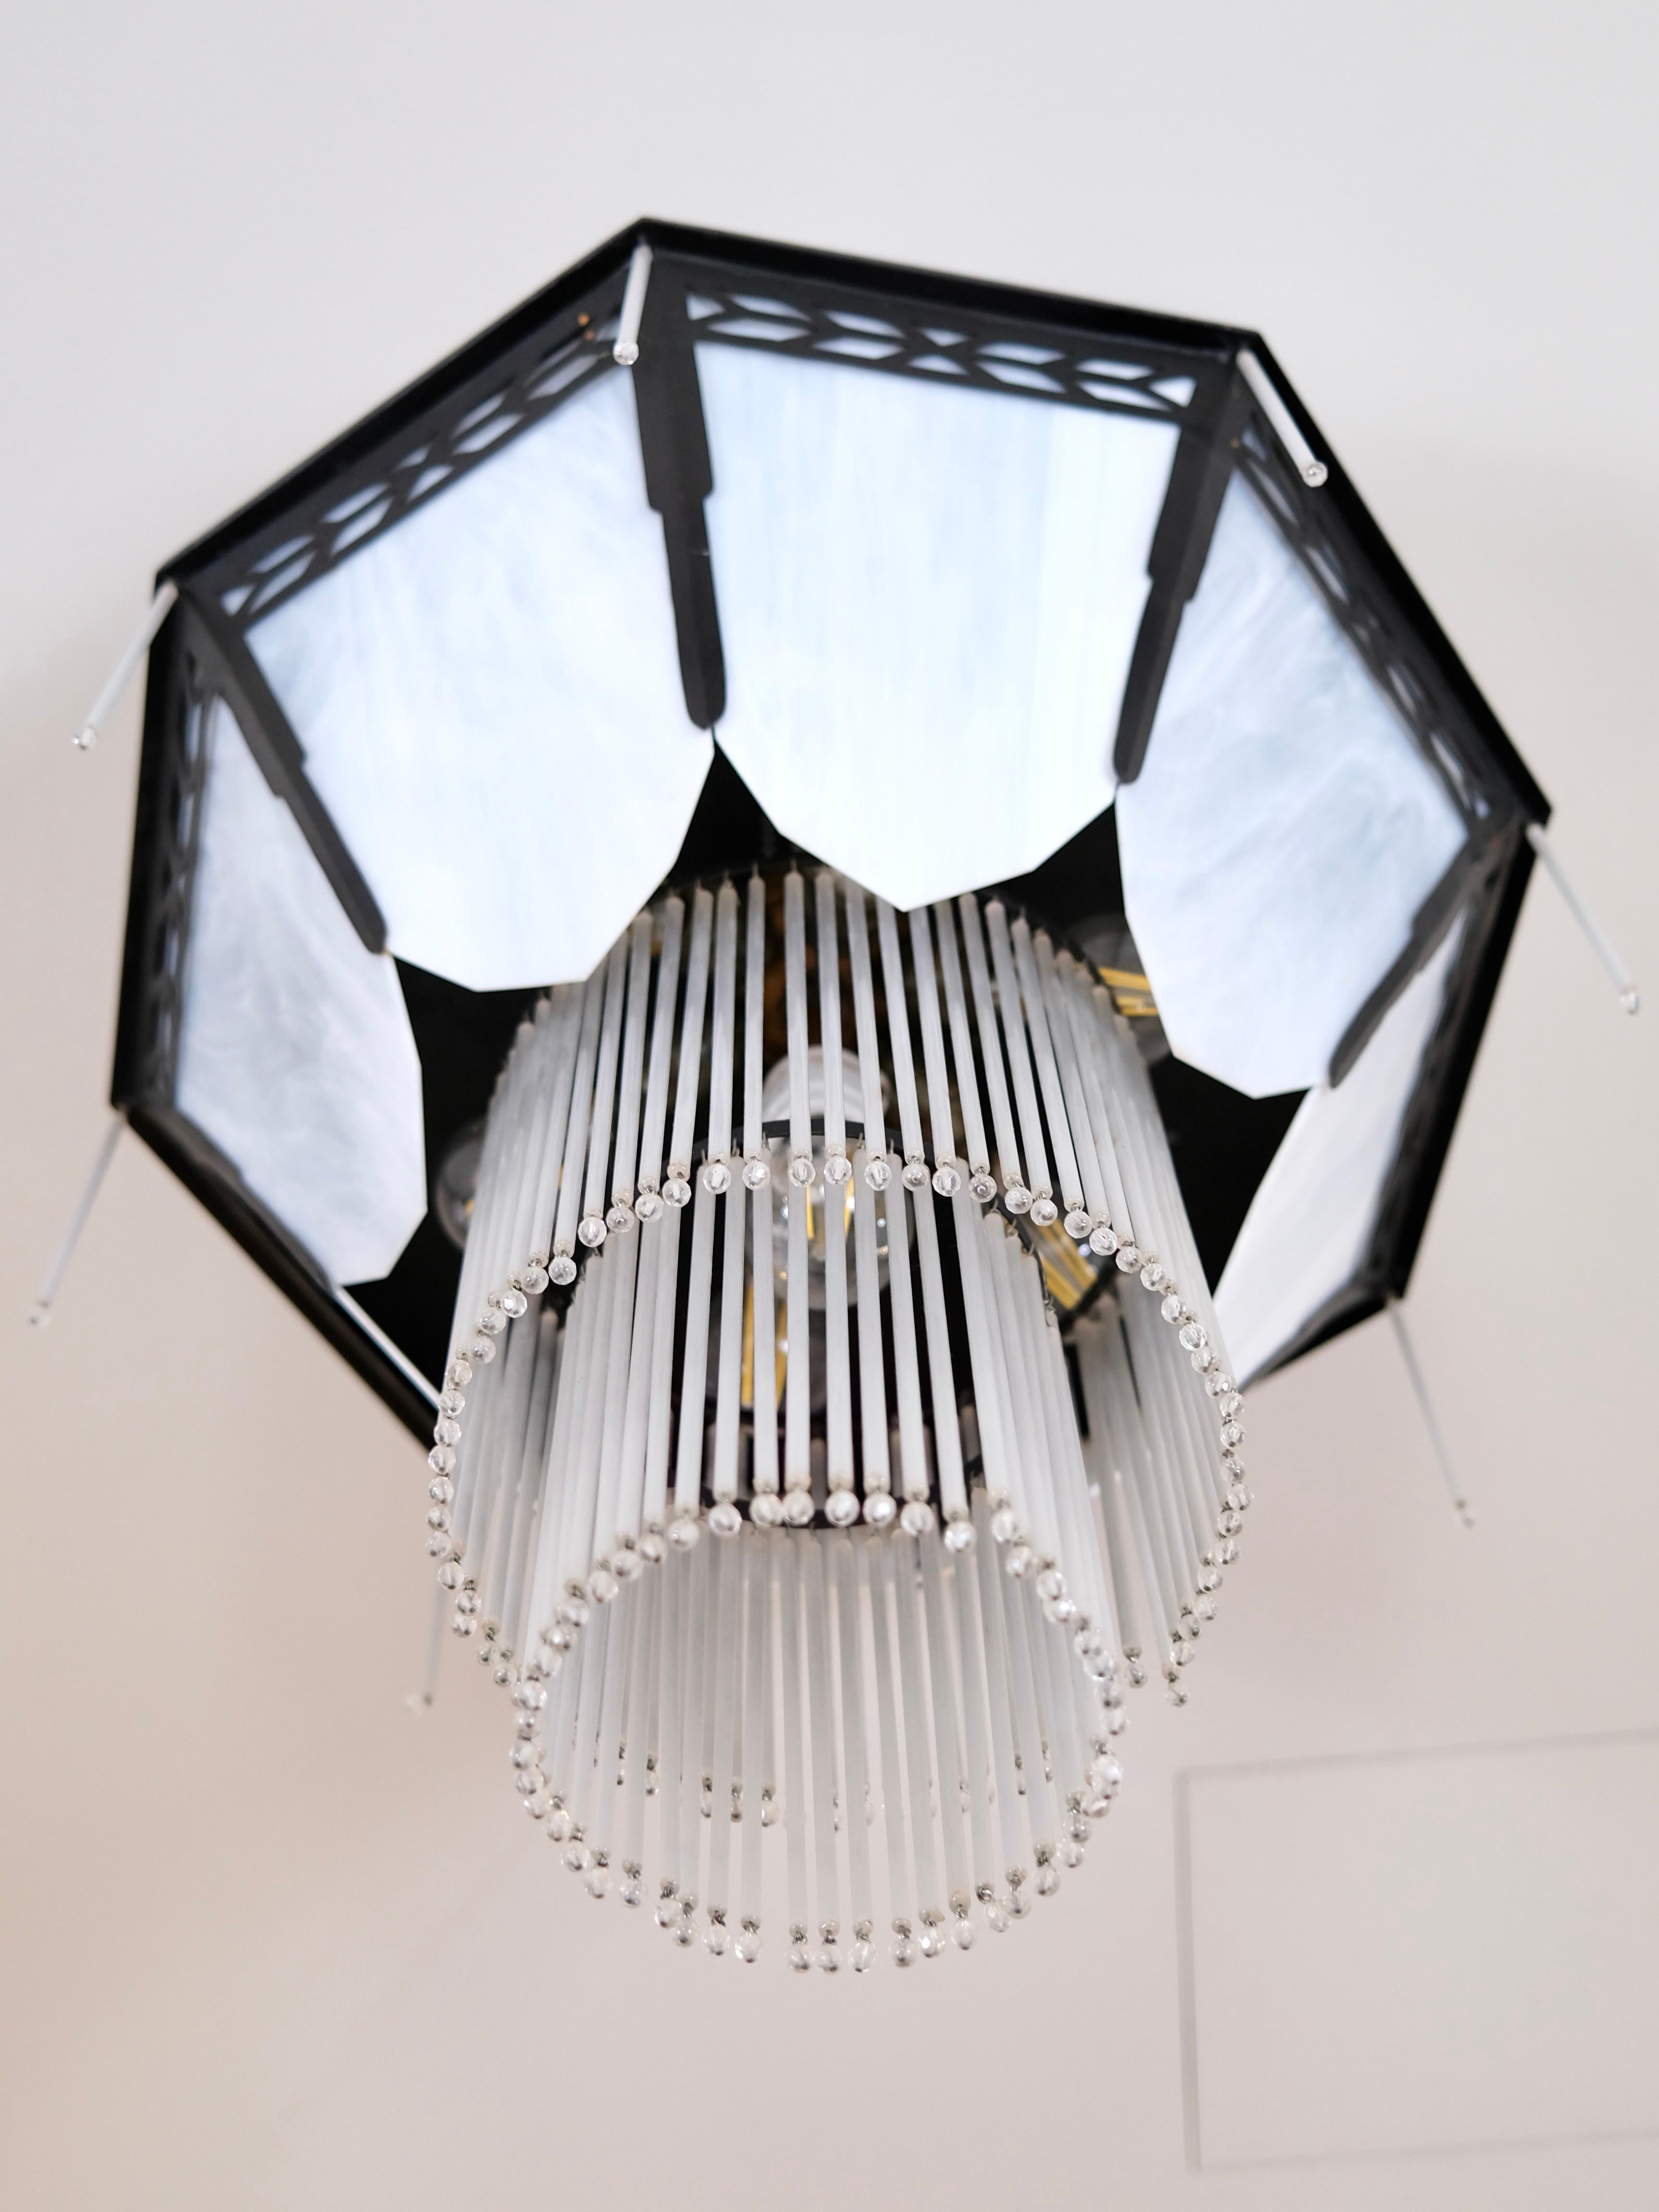 Blackened Octagonal Art Deco Style Chandelier with Glass and Black Metal Mount For Sale